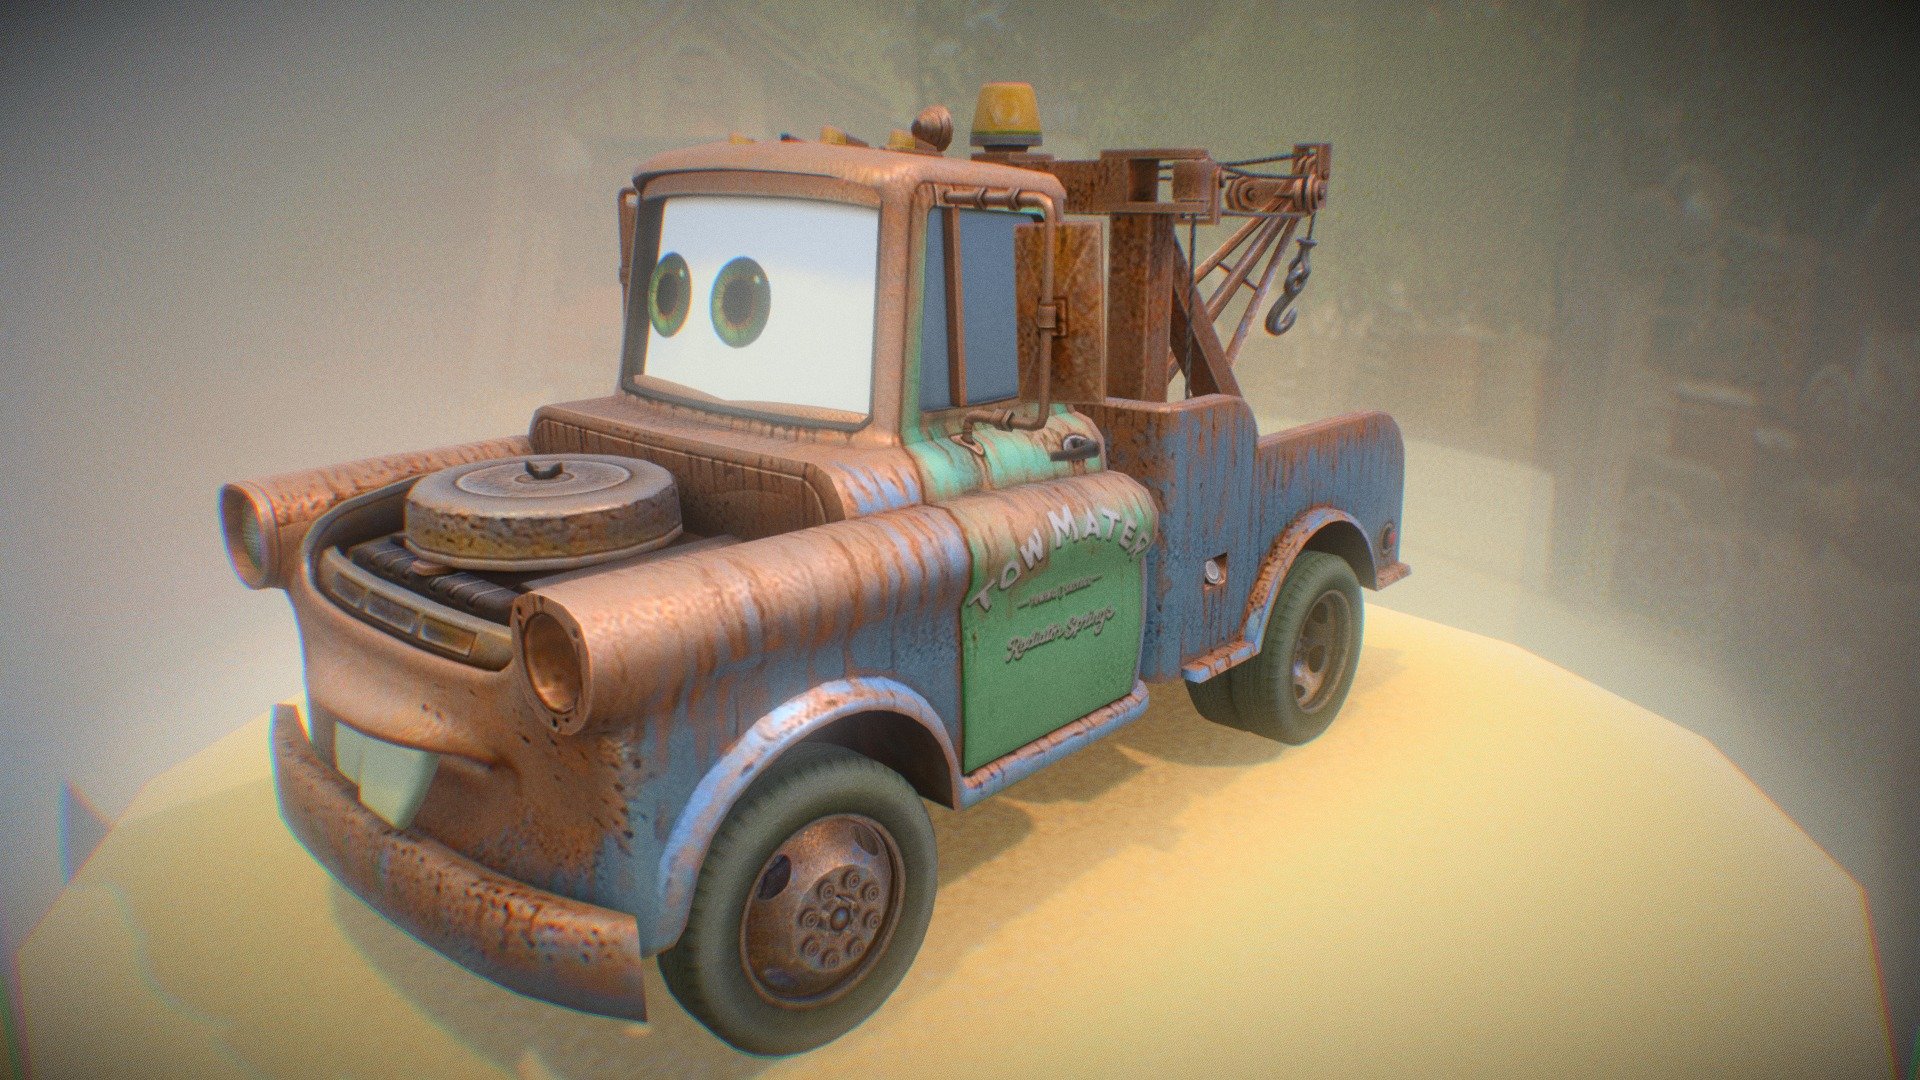 Here's a tribute to Pixar with a low res recreation of their beloved character Mater from Cars (2006).

I was fortunated to work on these beloved characters for Nintendo Wii version of Cars the game, and this serves as a fond memories of being utterly stubborn to build something from ground up with limited resources and restrictions 3d model